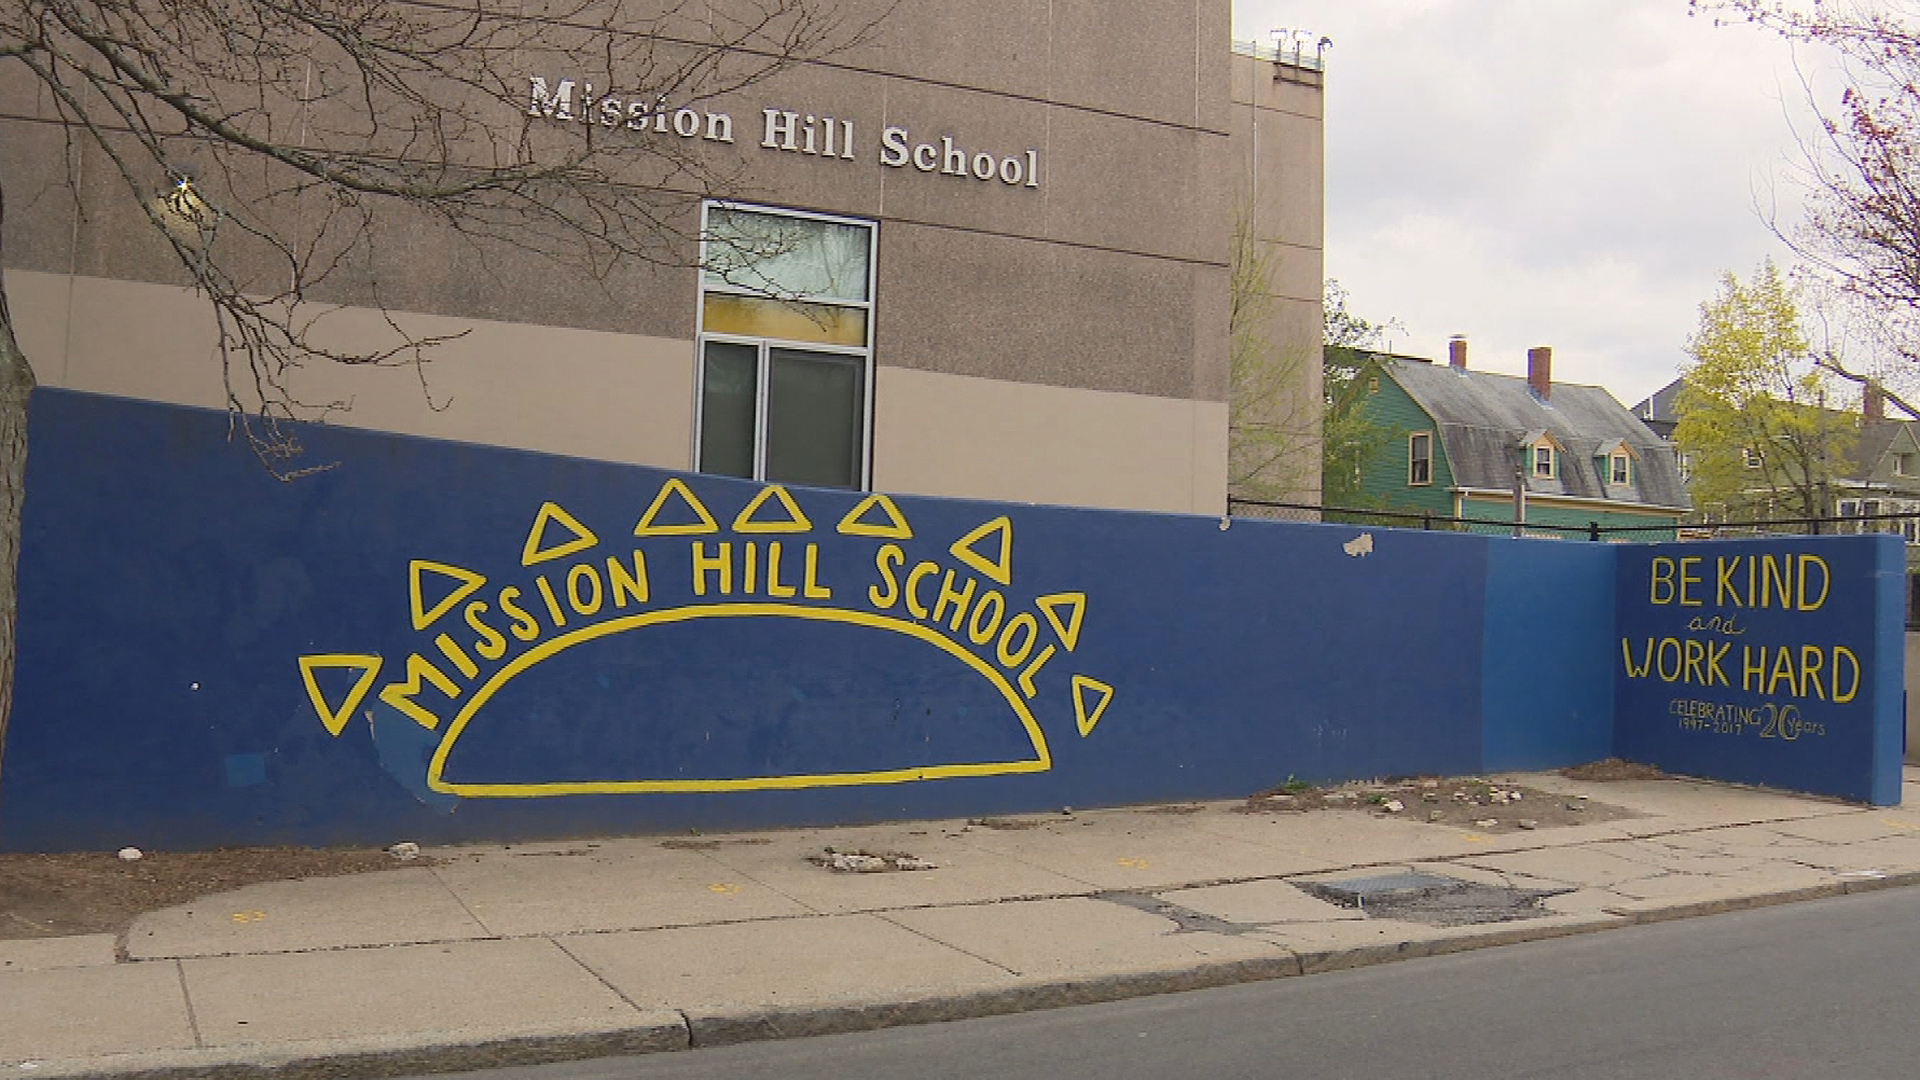 Boston School Committee Votes To Shut Down Mission Hill School After Sexual Misconduct Investigation